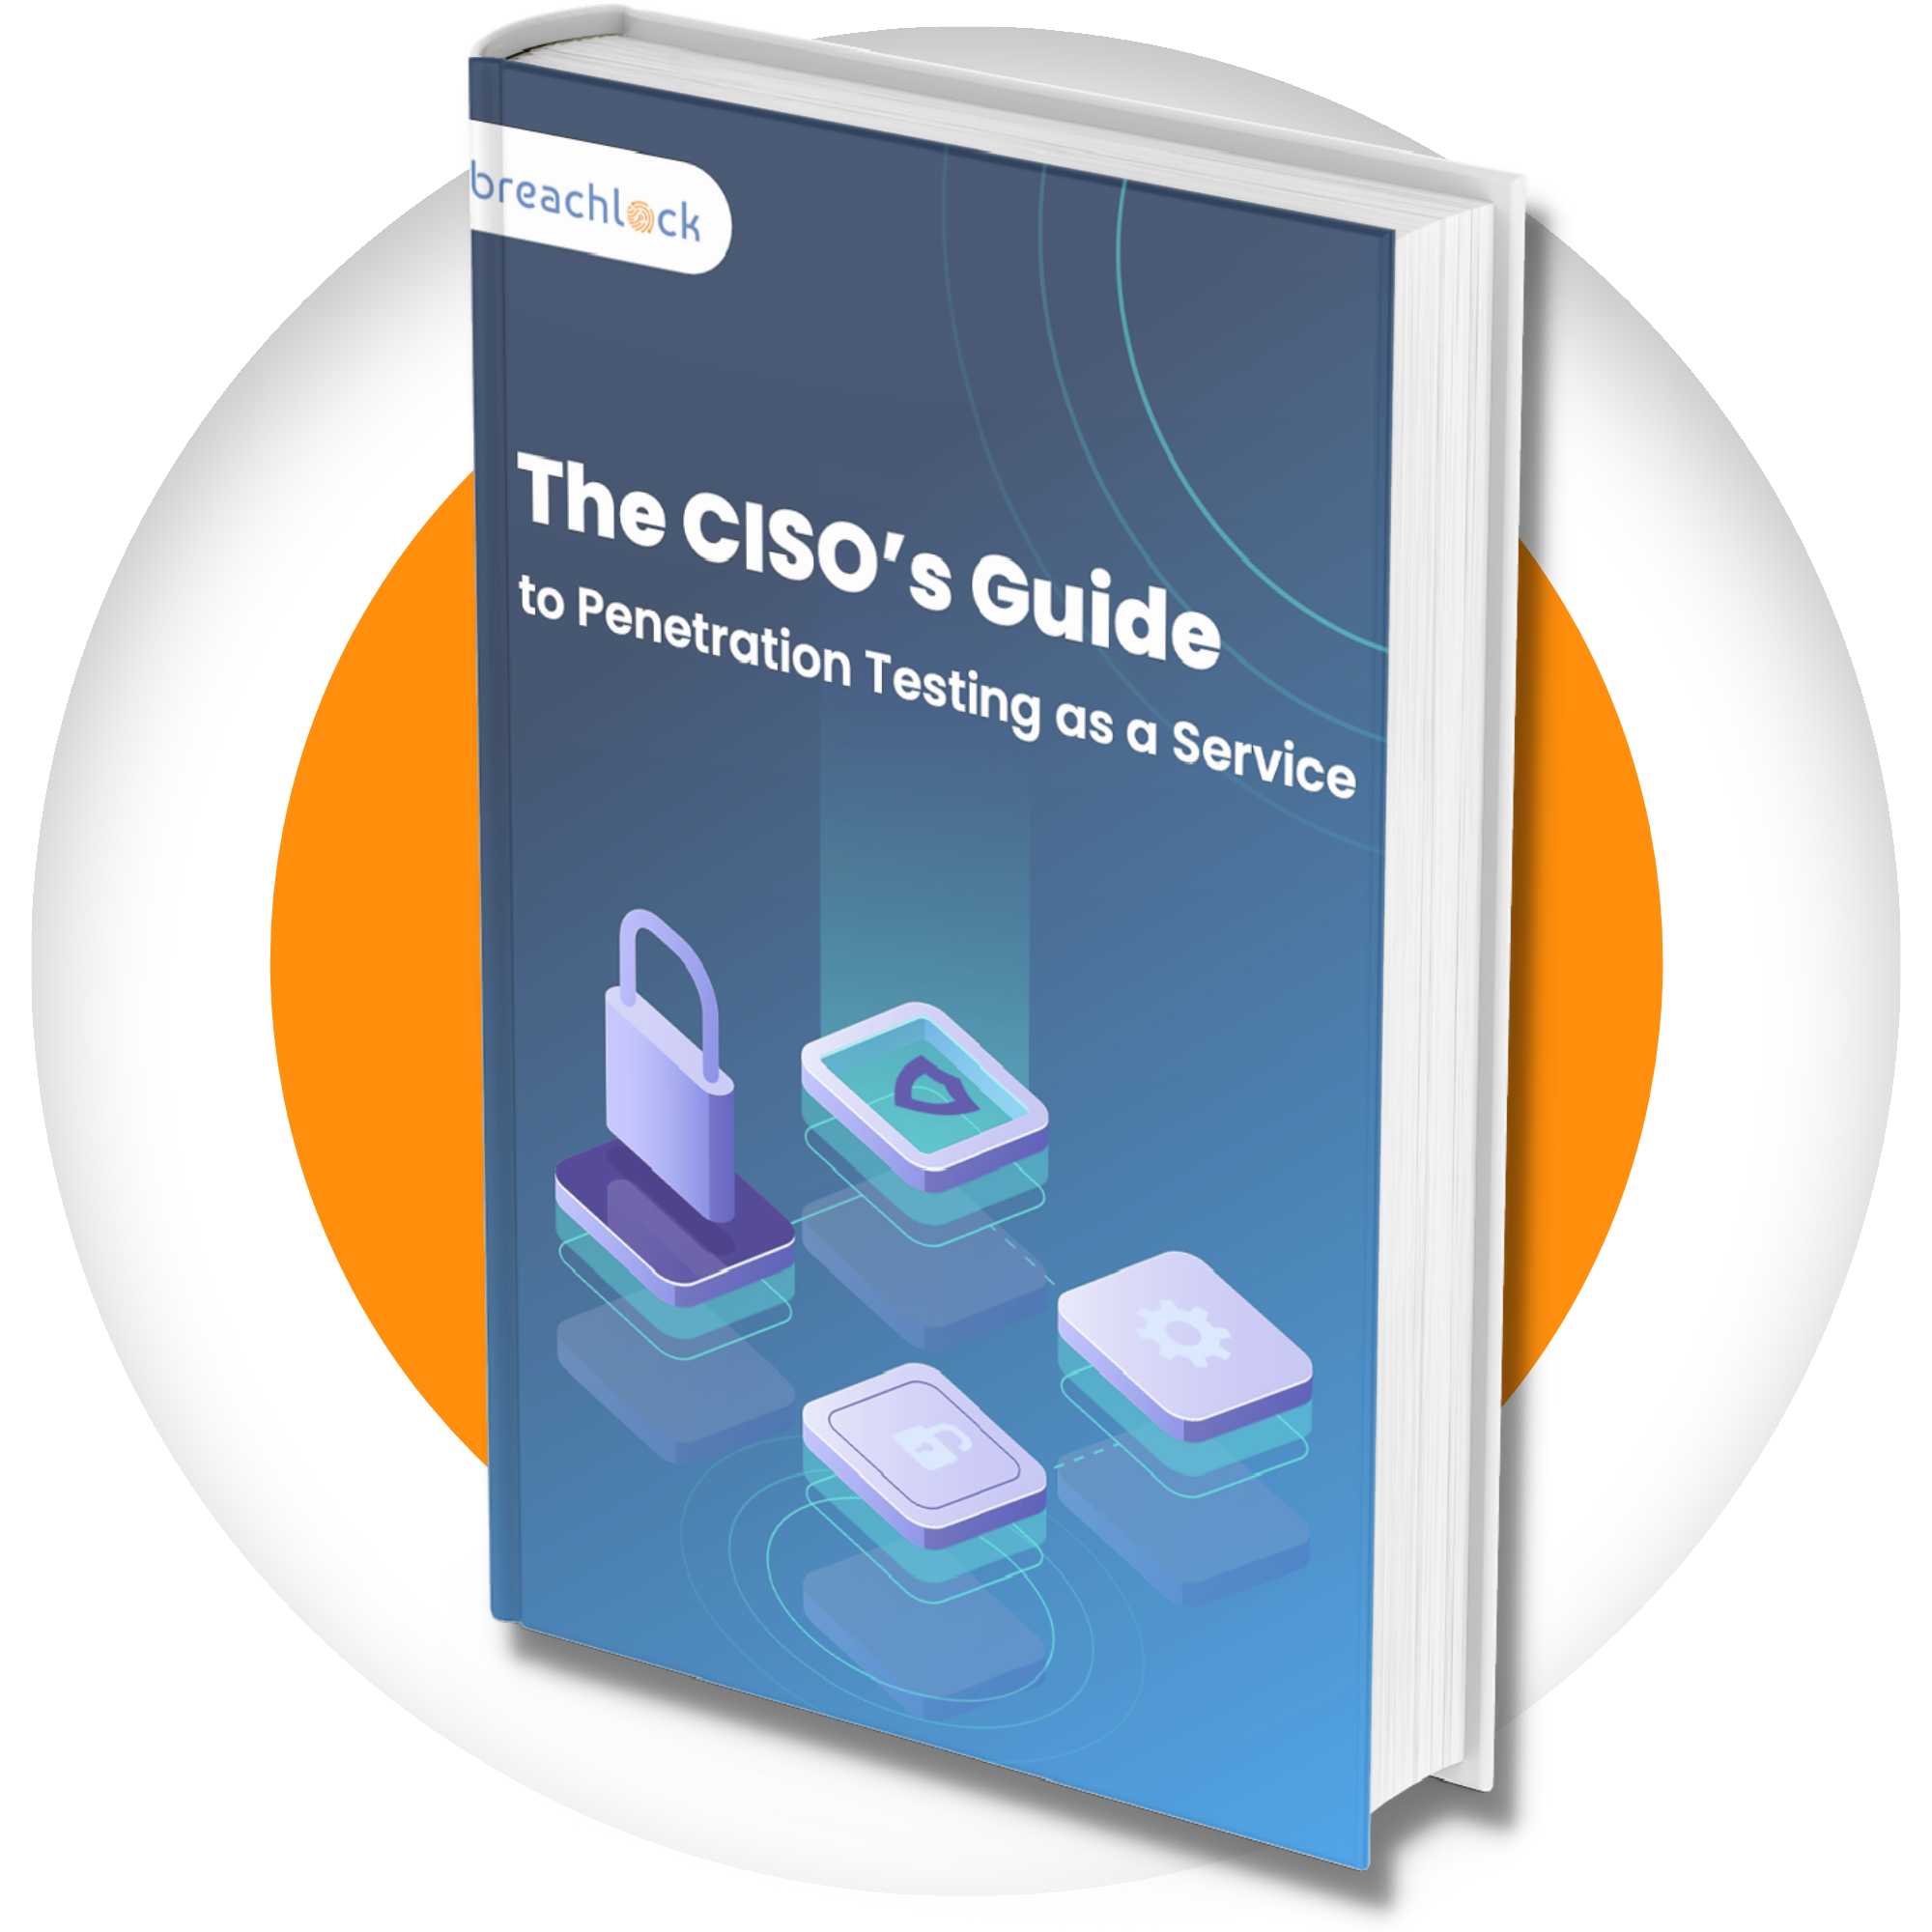 The CISOs Guide to PTaaS